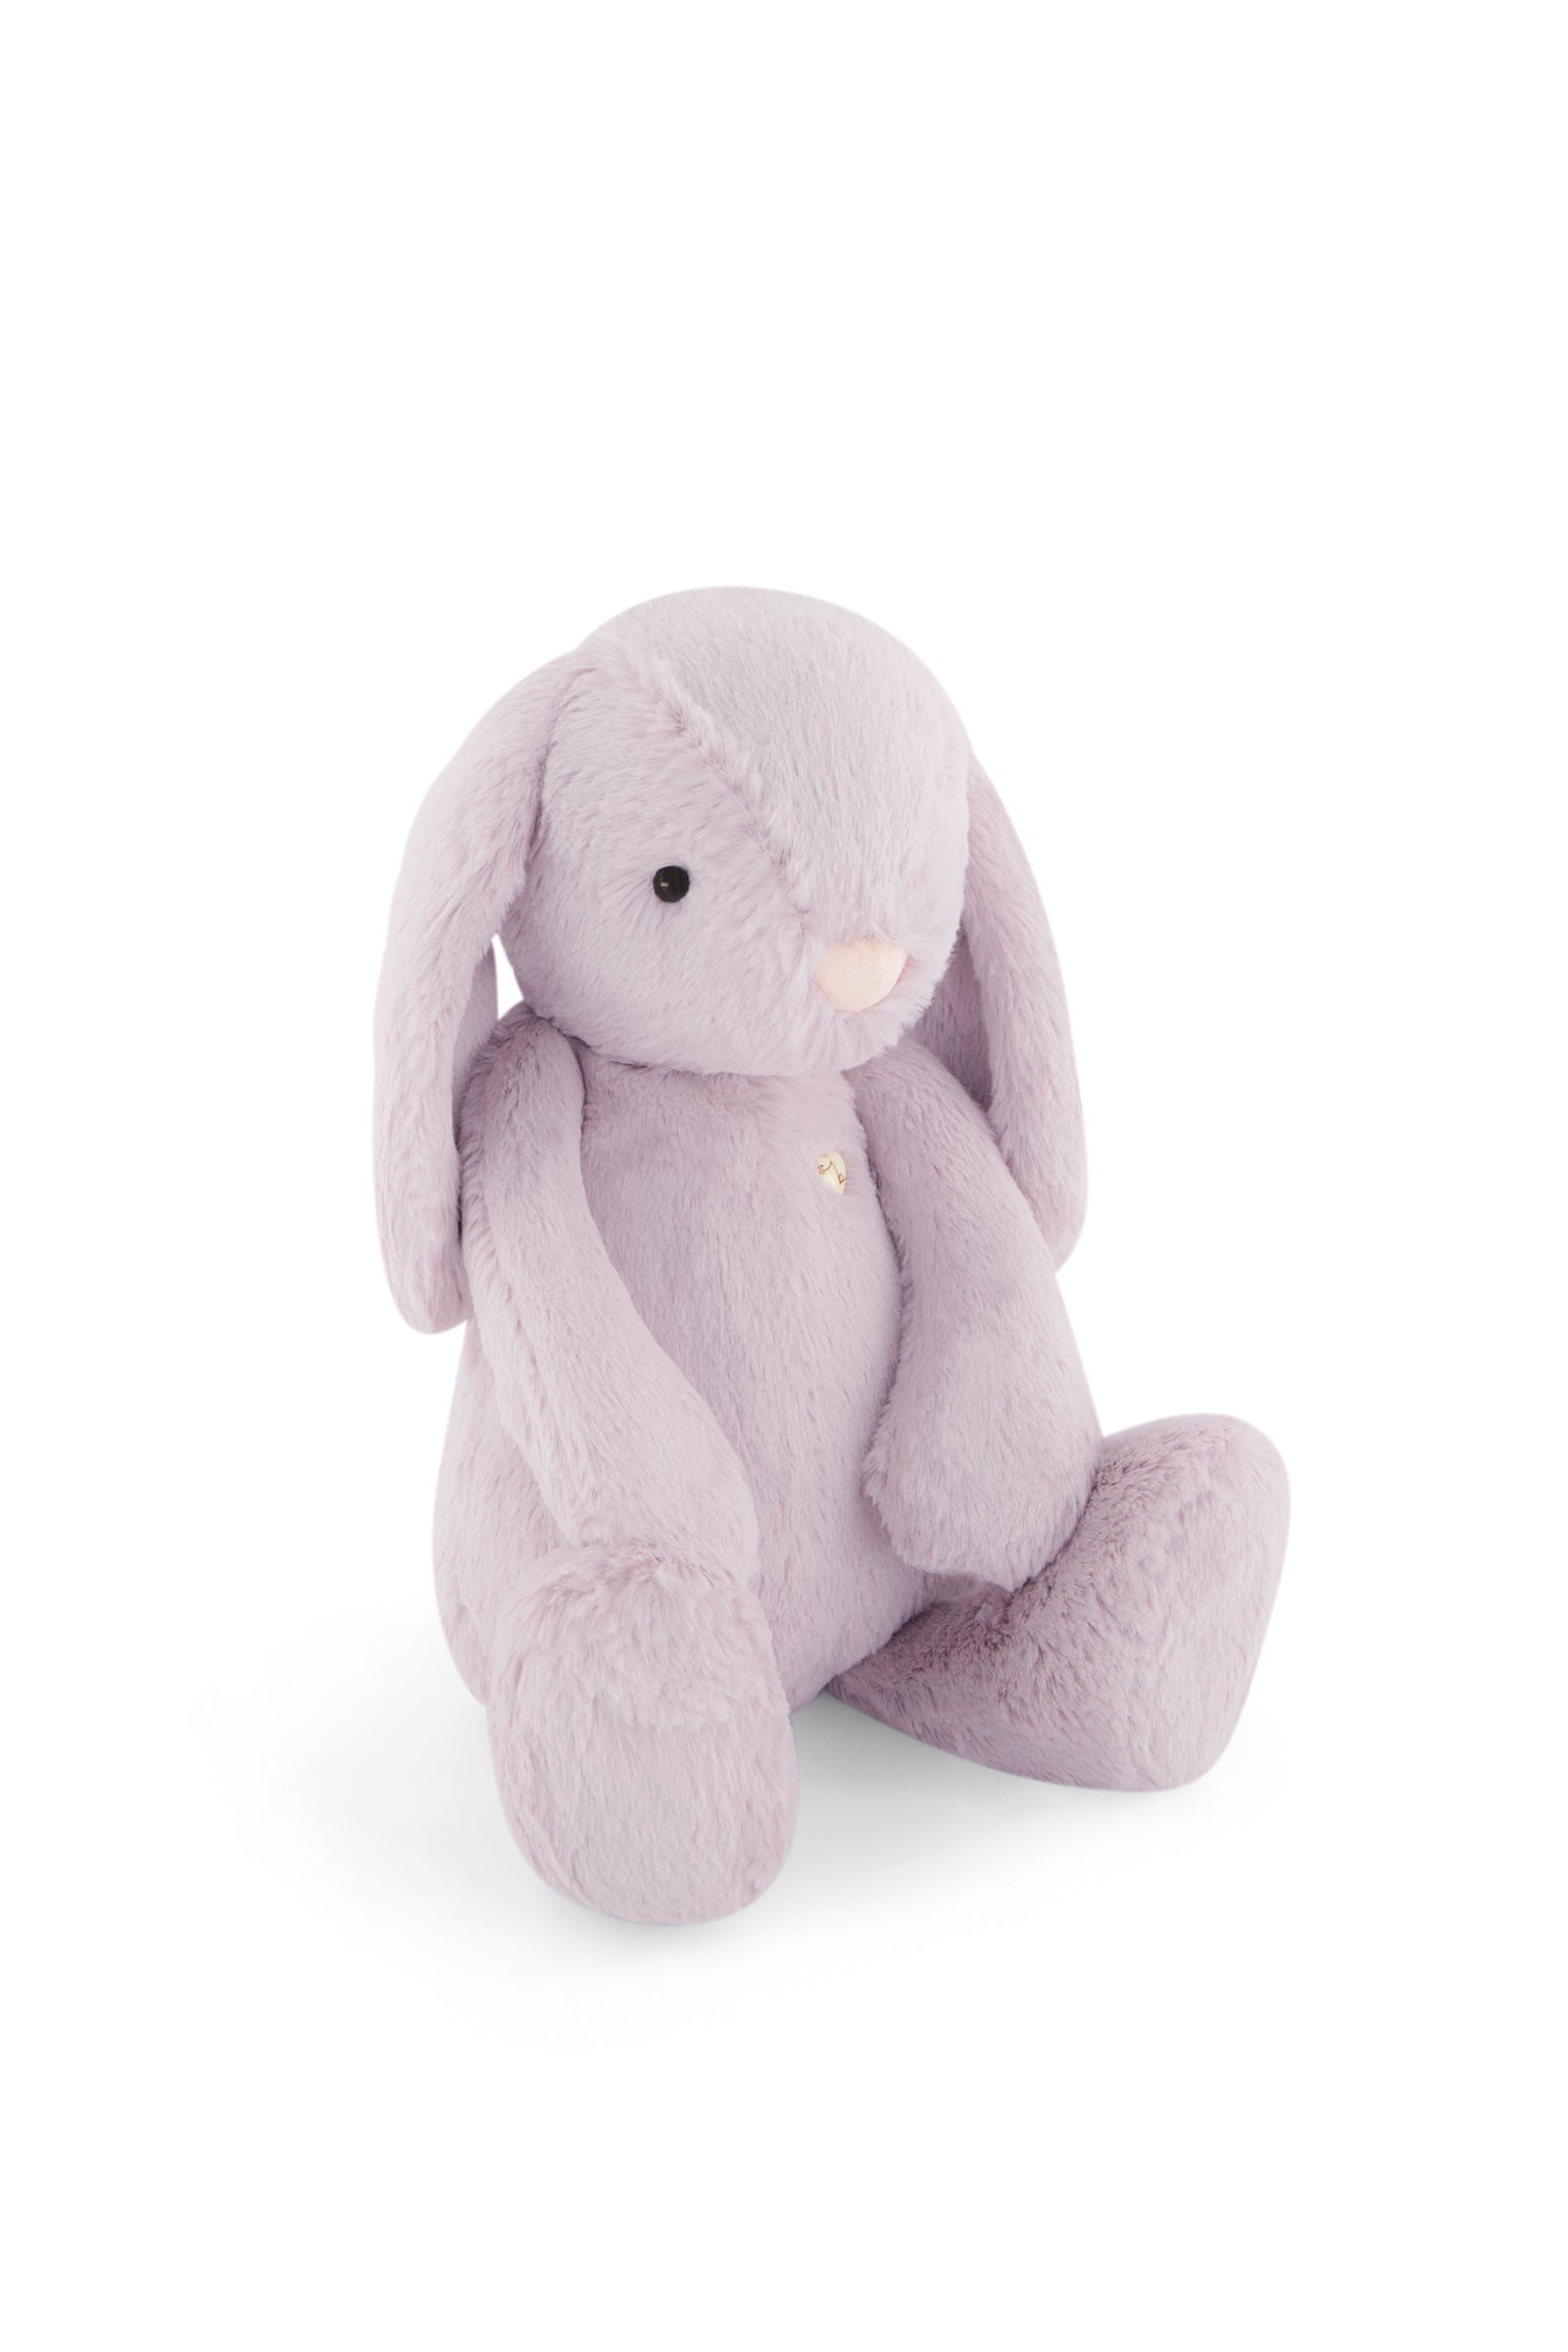 Snuggle Bunnies | Penelope the Bunny | Violet